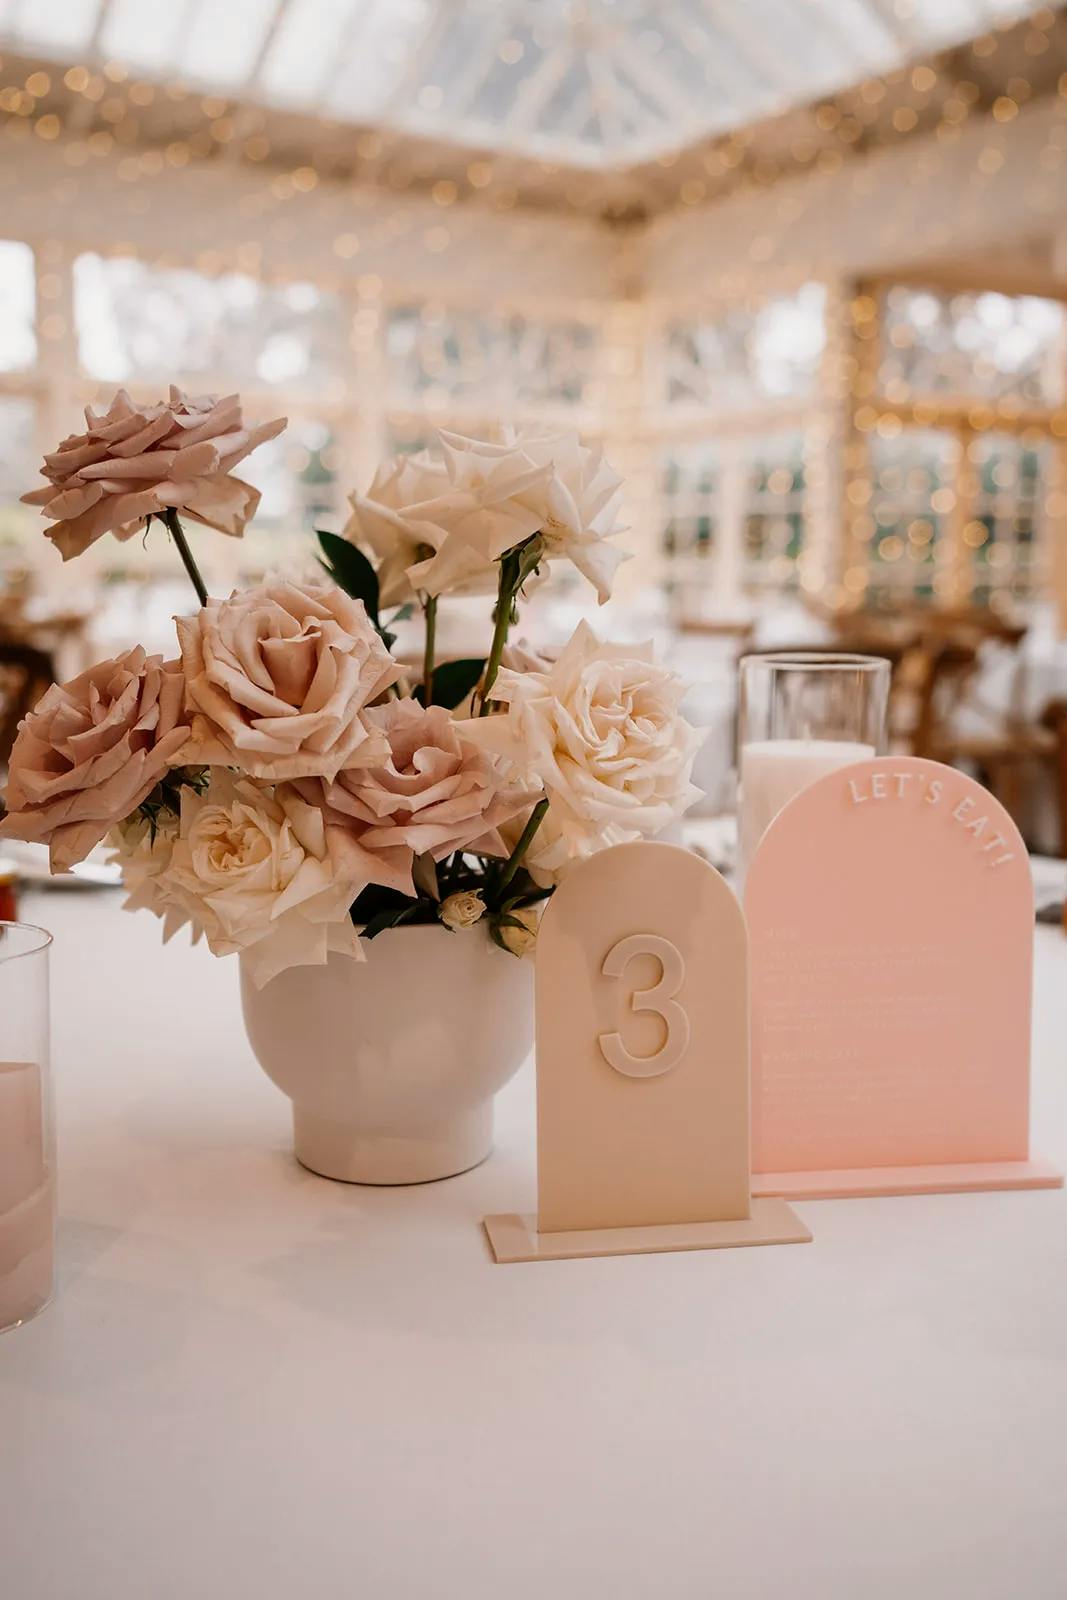 Wedding table setting with flowers and place cards